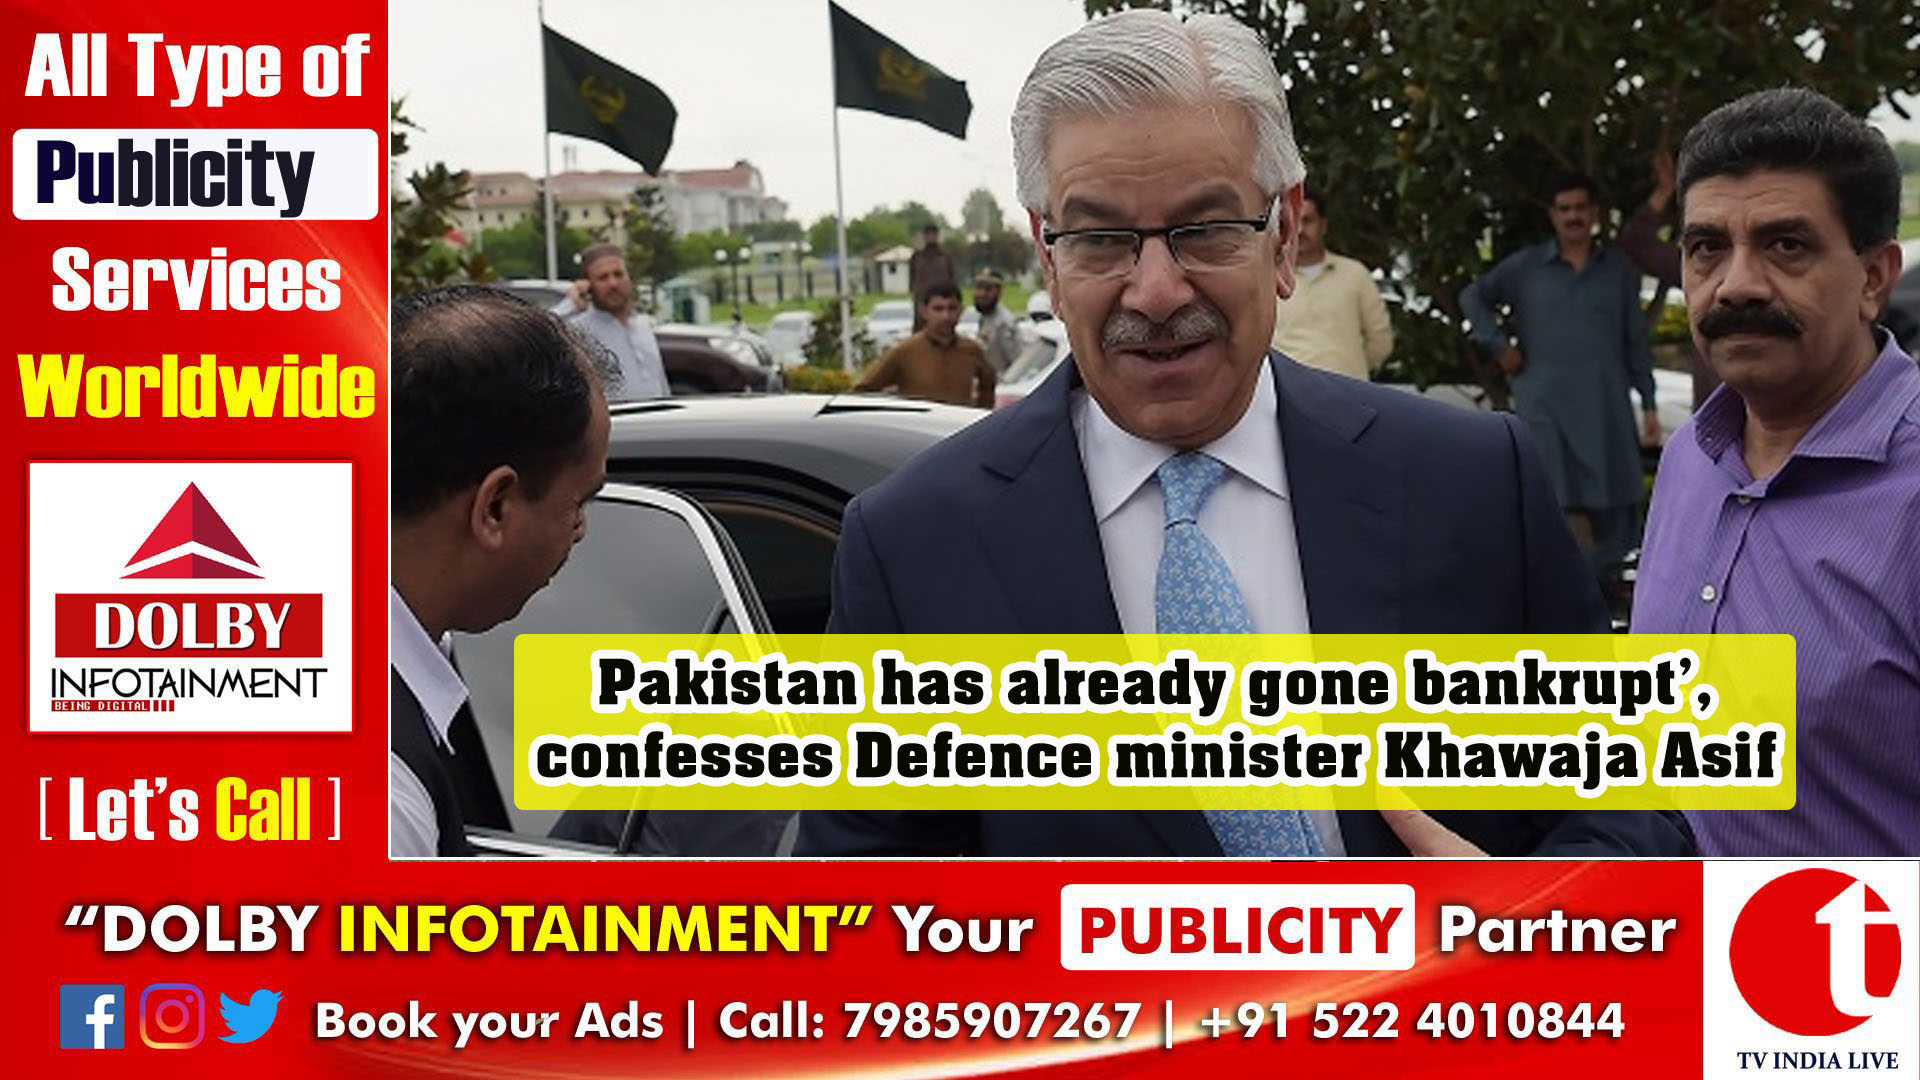 'Pakistan has already gone bankrupt’, confesses Defence minister Khawaja Asif